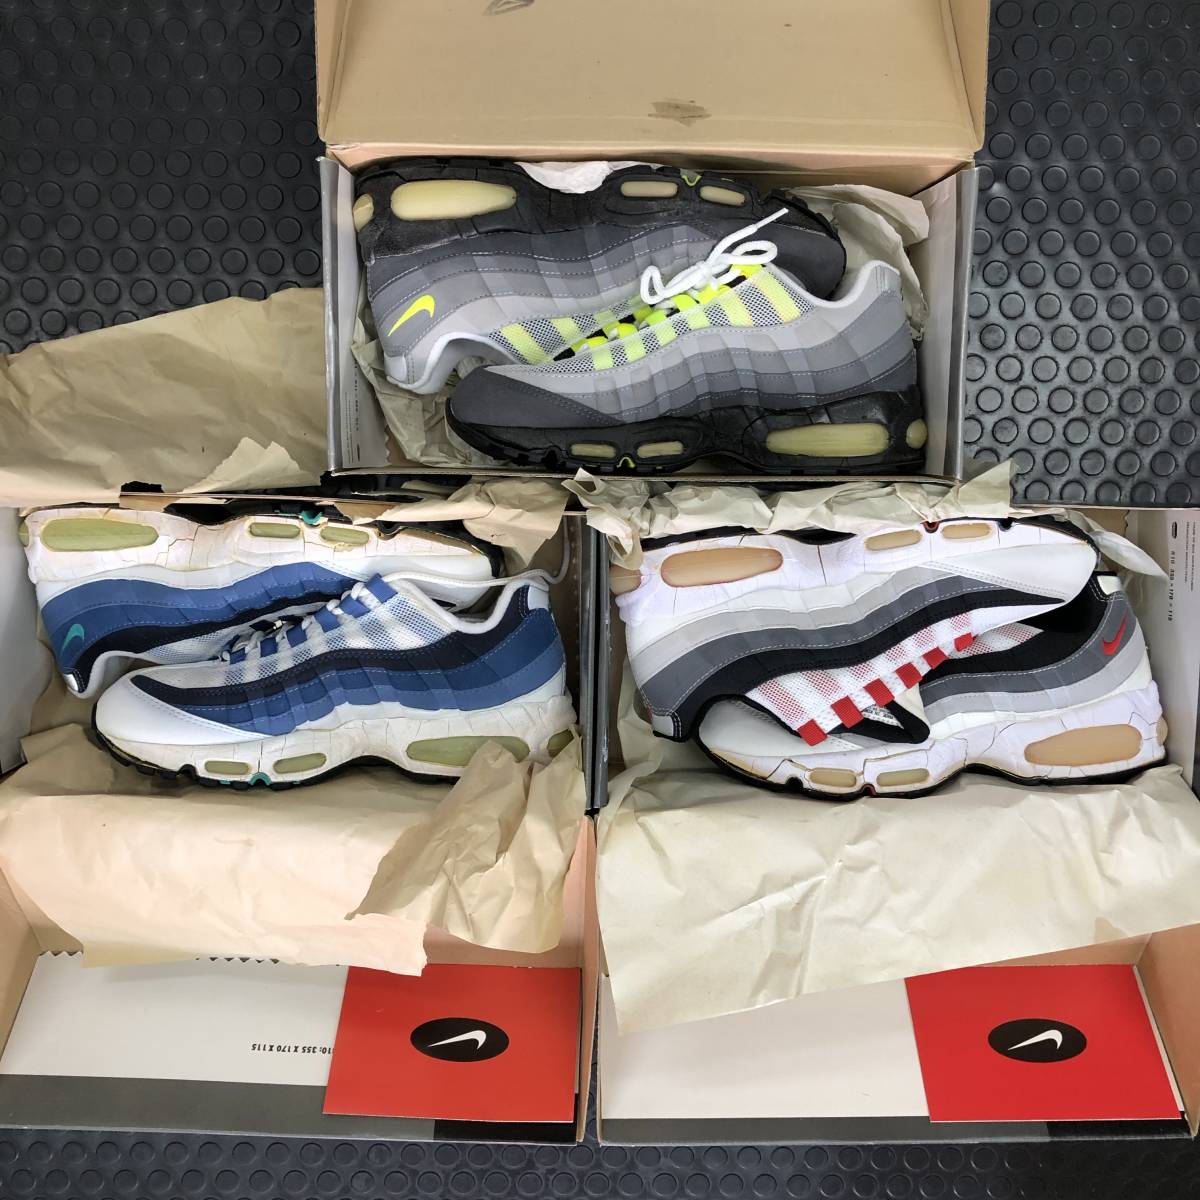  new goods NIKE AIR MAX 95 104050 YELLOW BLUE RED Nike air max yellow blue red original 3 color 27cm. water disassembly box attaching Junk 